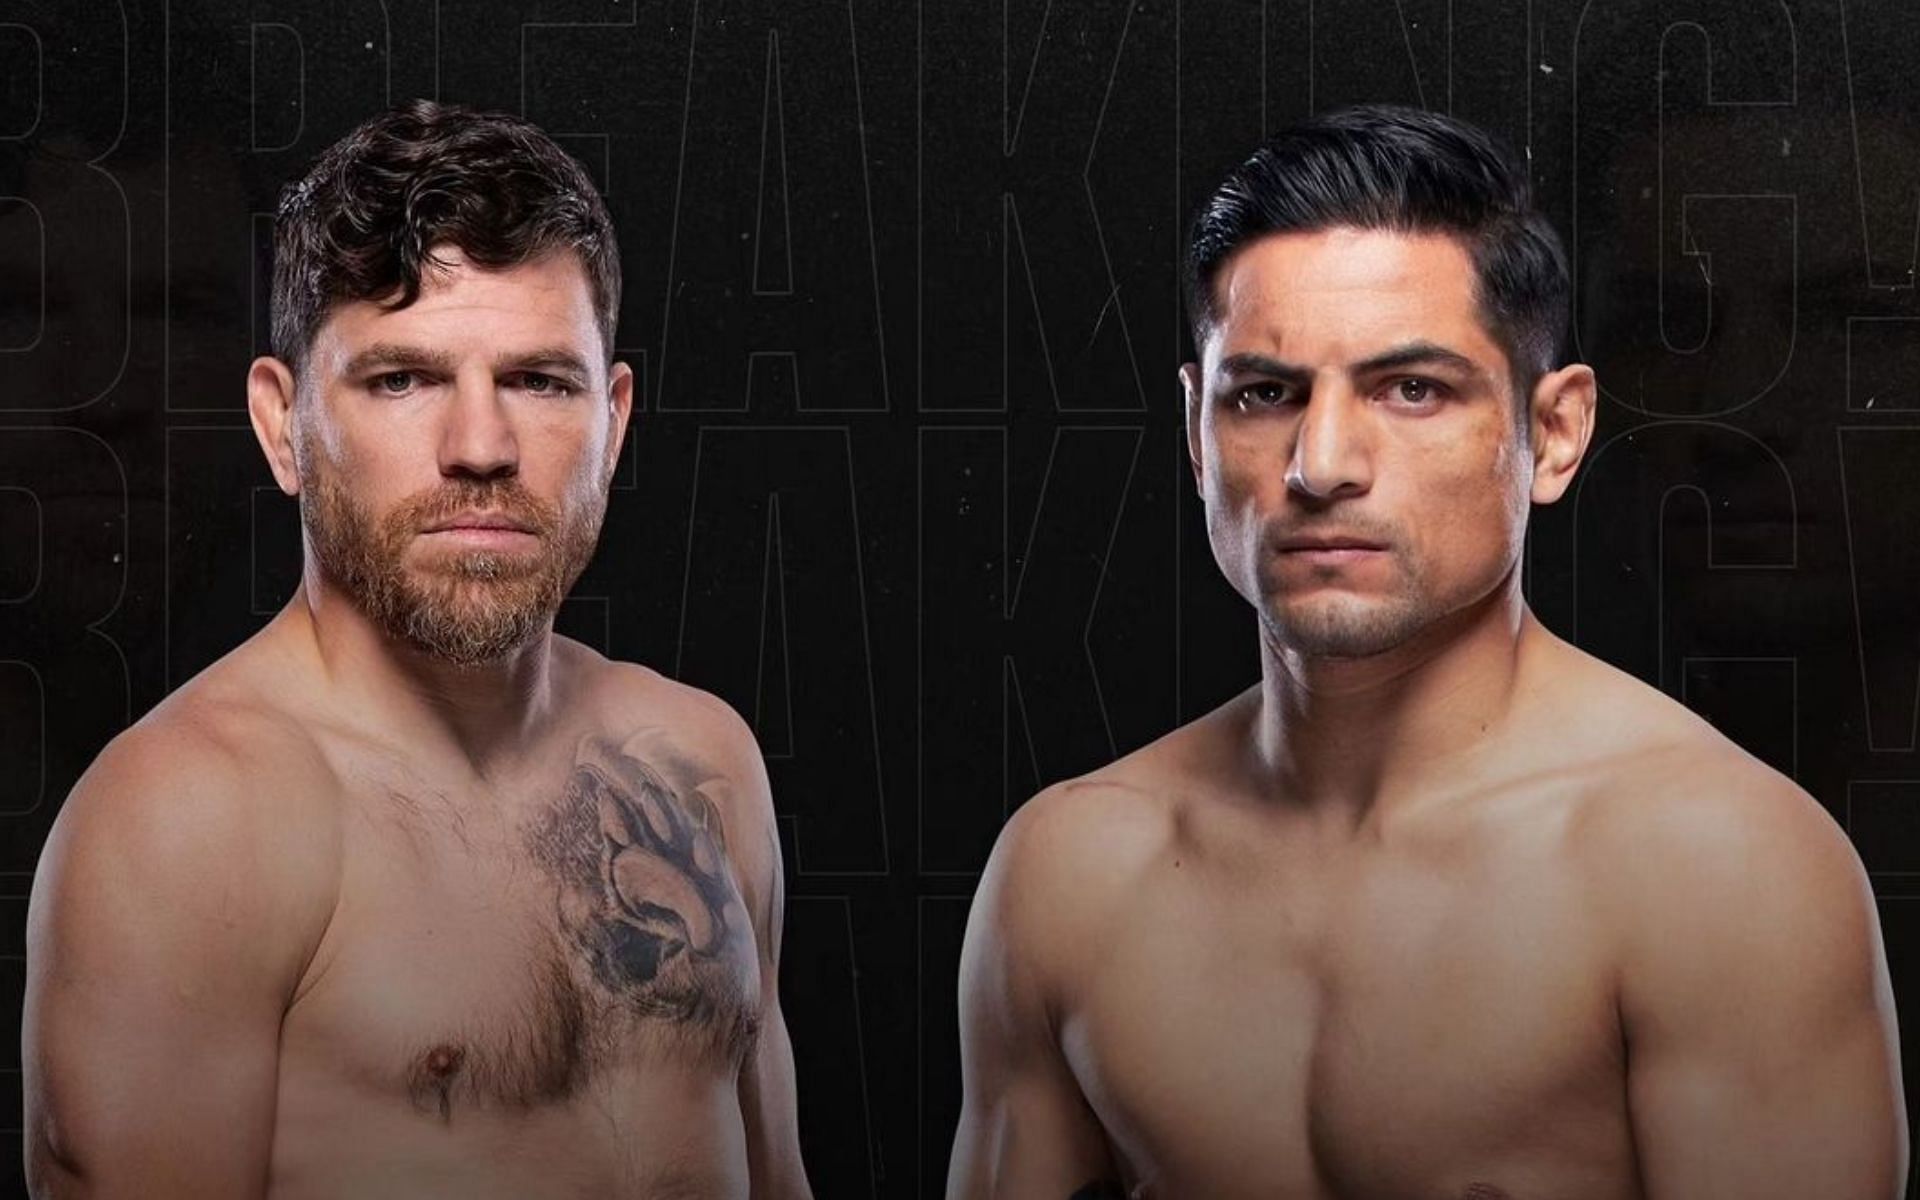 Jim Miller (left) takes on Gabriel Ben&iacute;tez (right) at the co-main event of UFC Fight Night 234 [Image courtesy @moggly_benitez on Instagram]